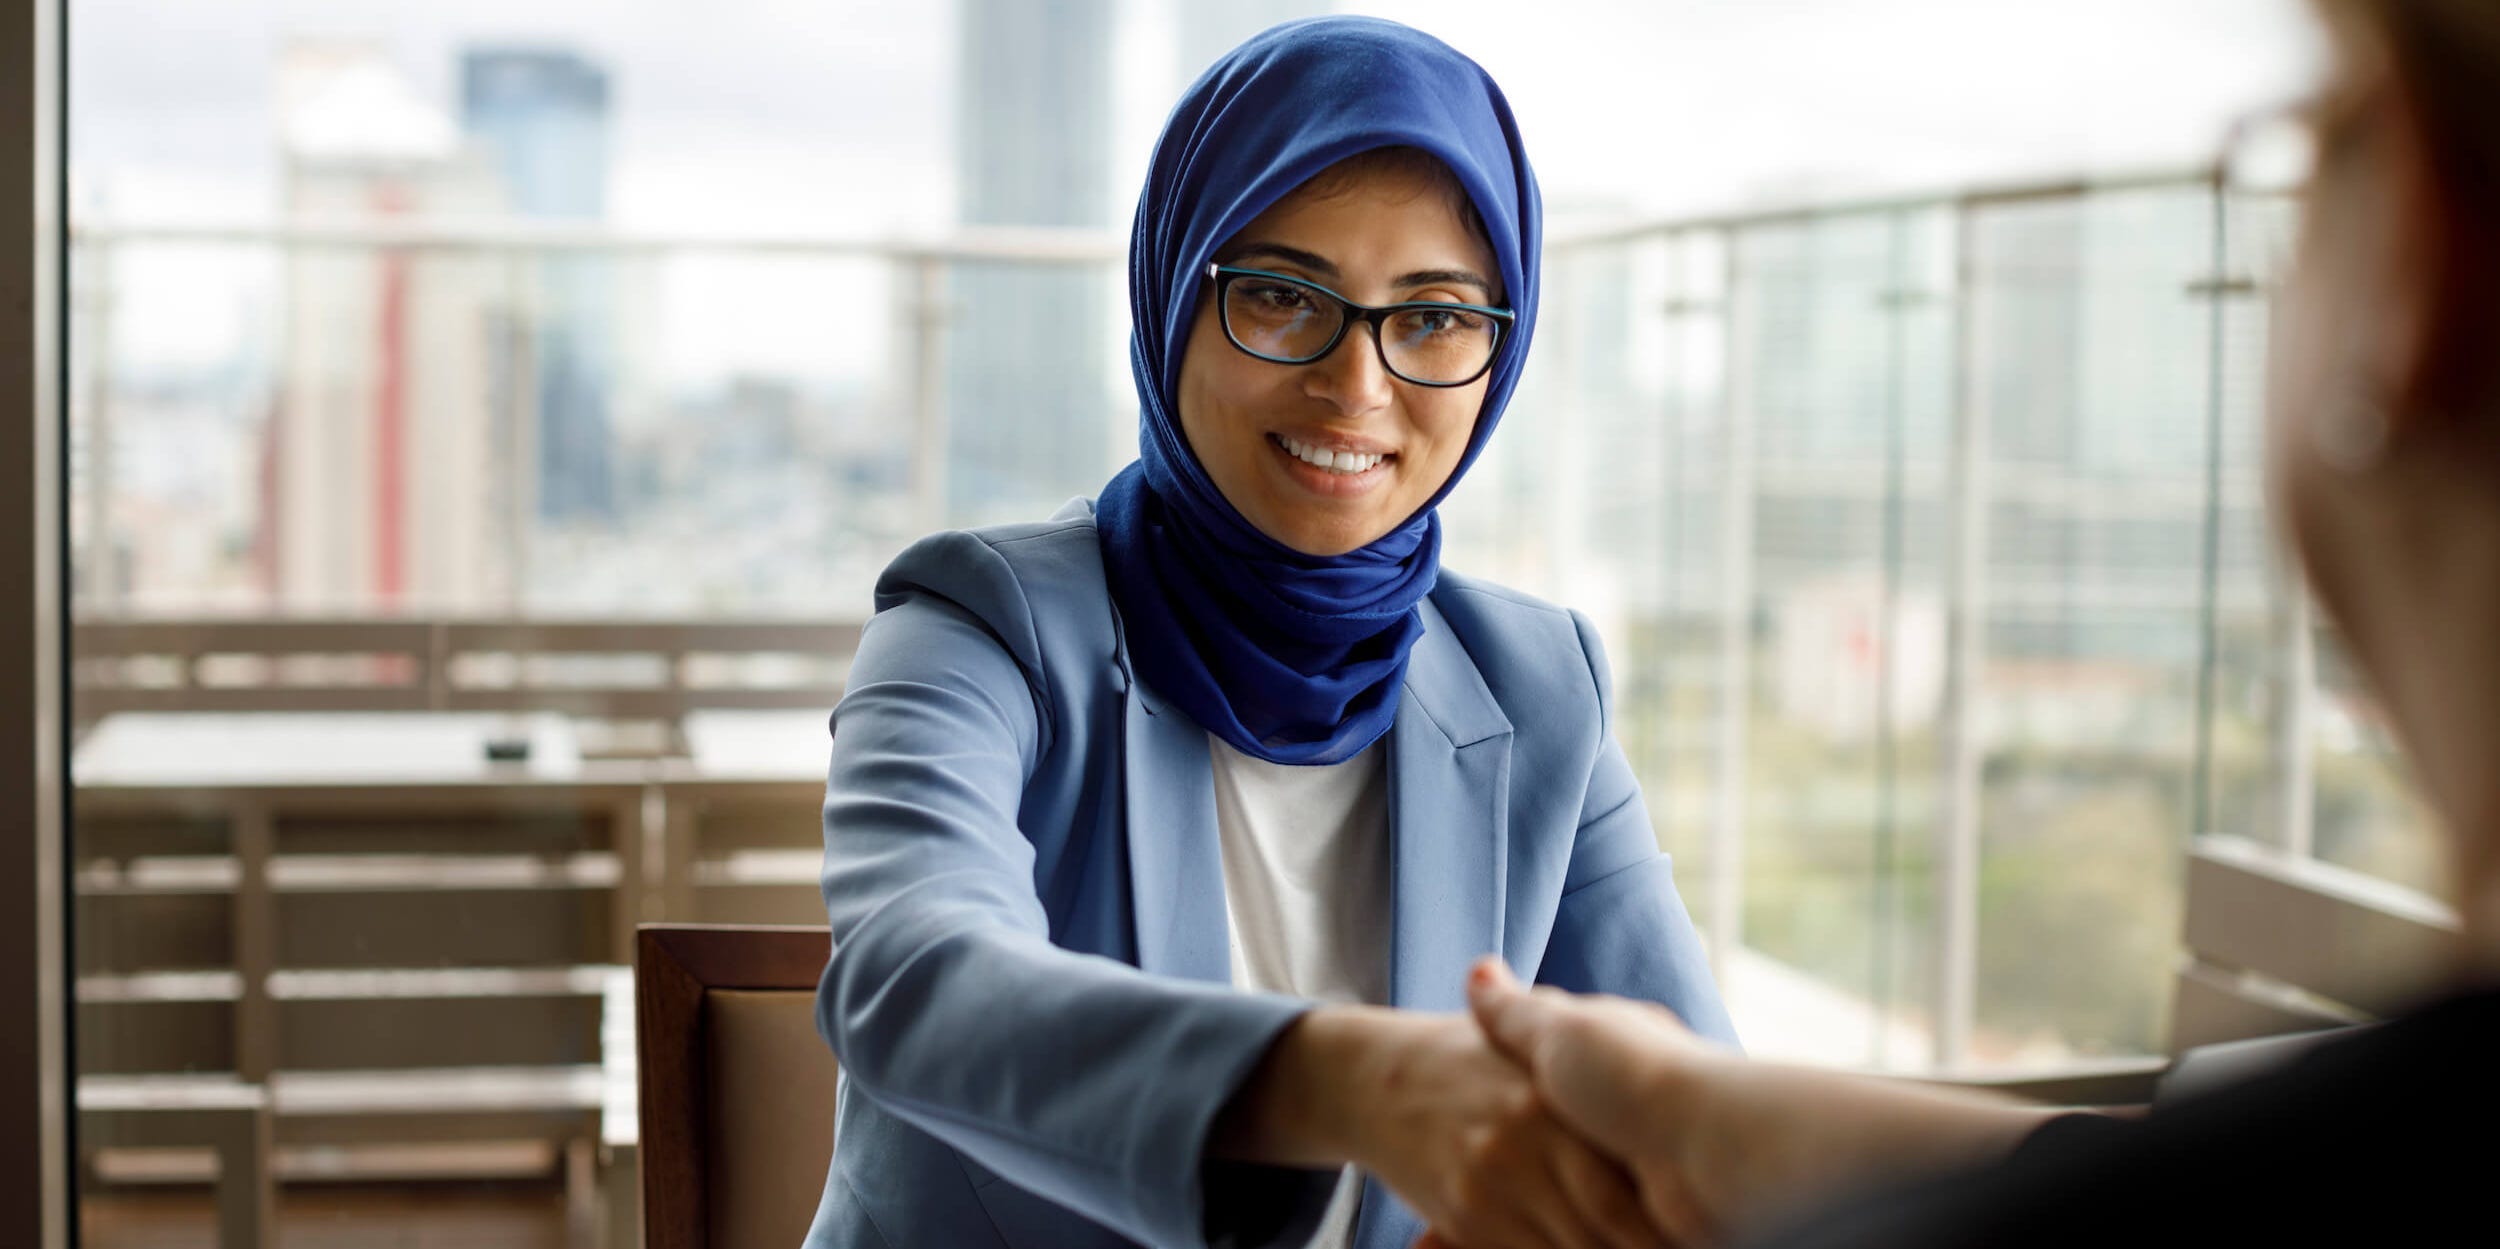 Smiling muslim woman in a business meeting shaking someone’s hand.